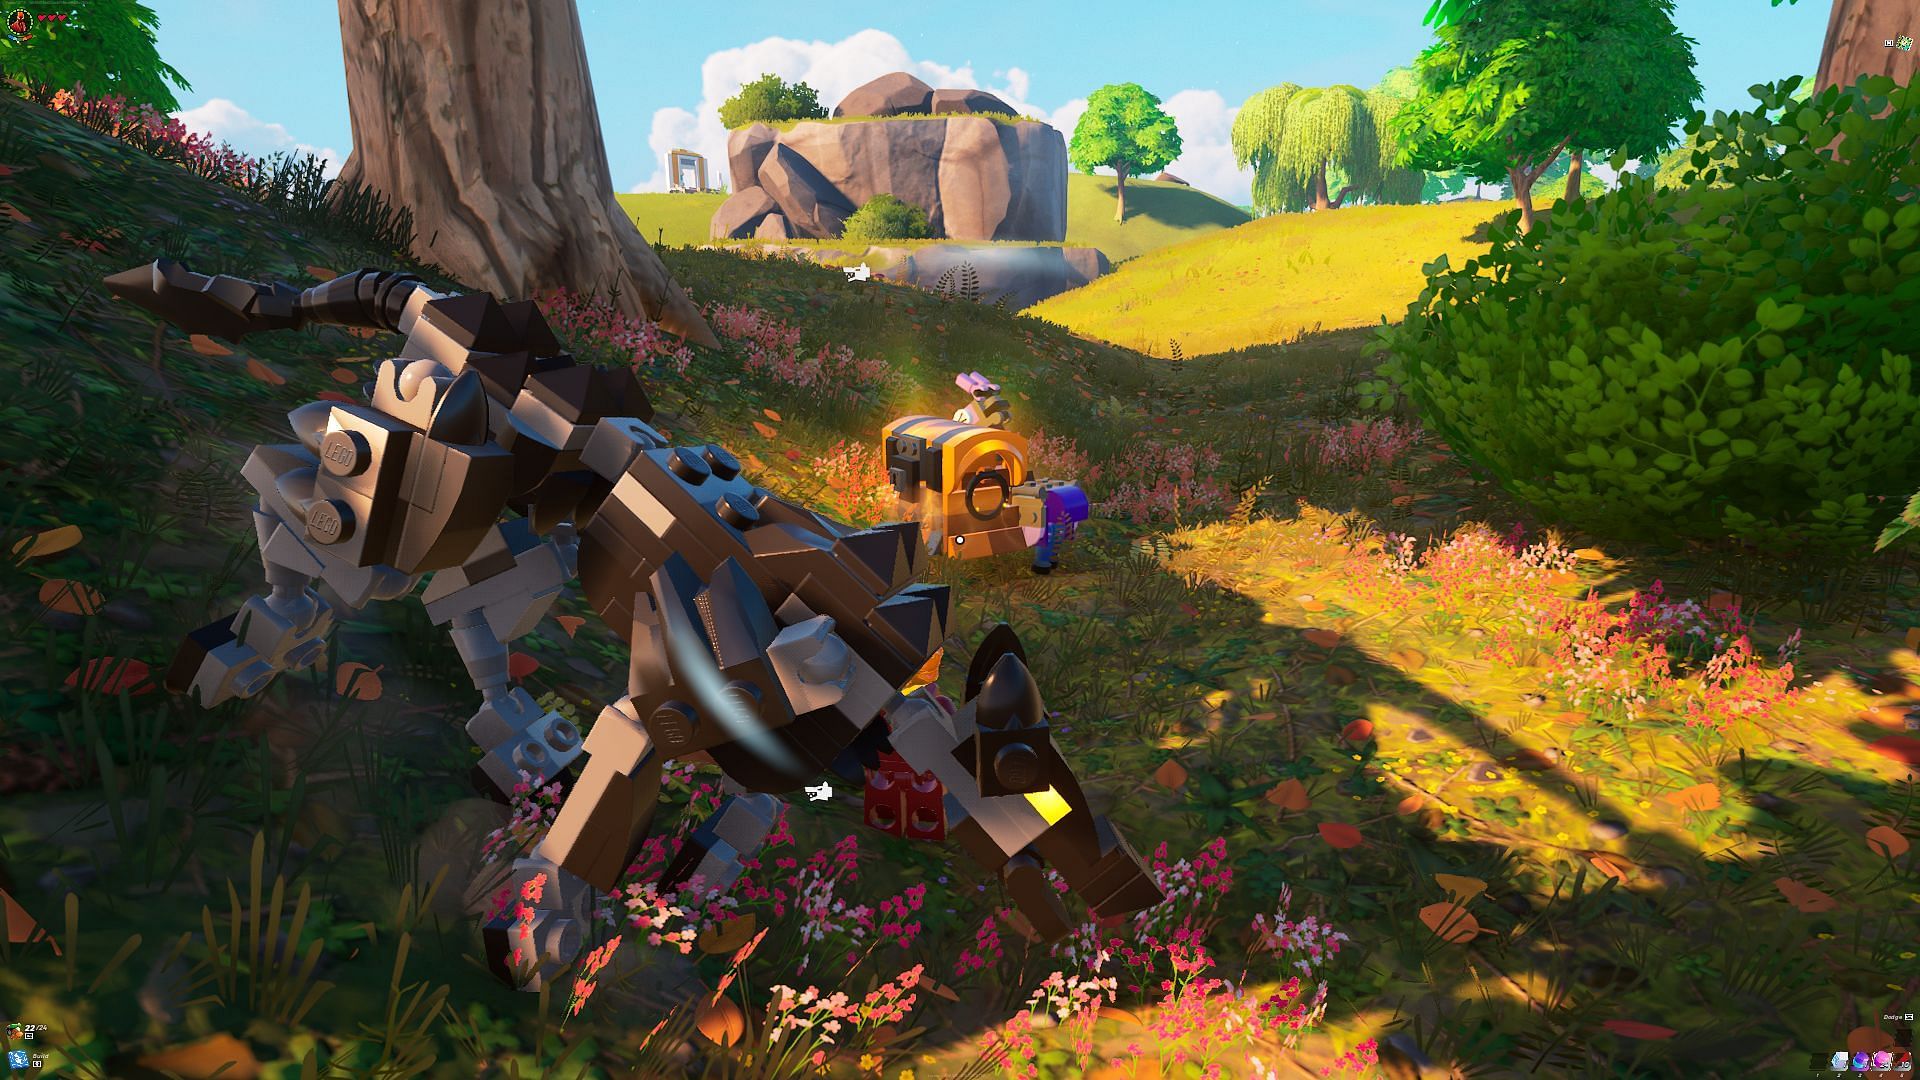 Be careful while exploring to find Chests and LEGO Llamas (Image via Epic Games)